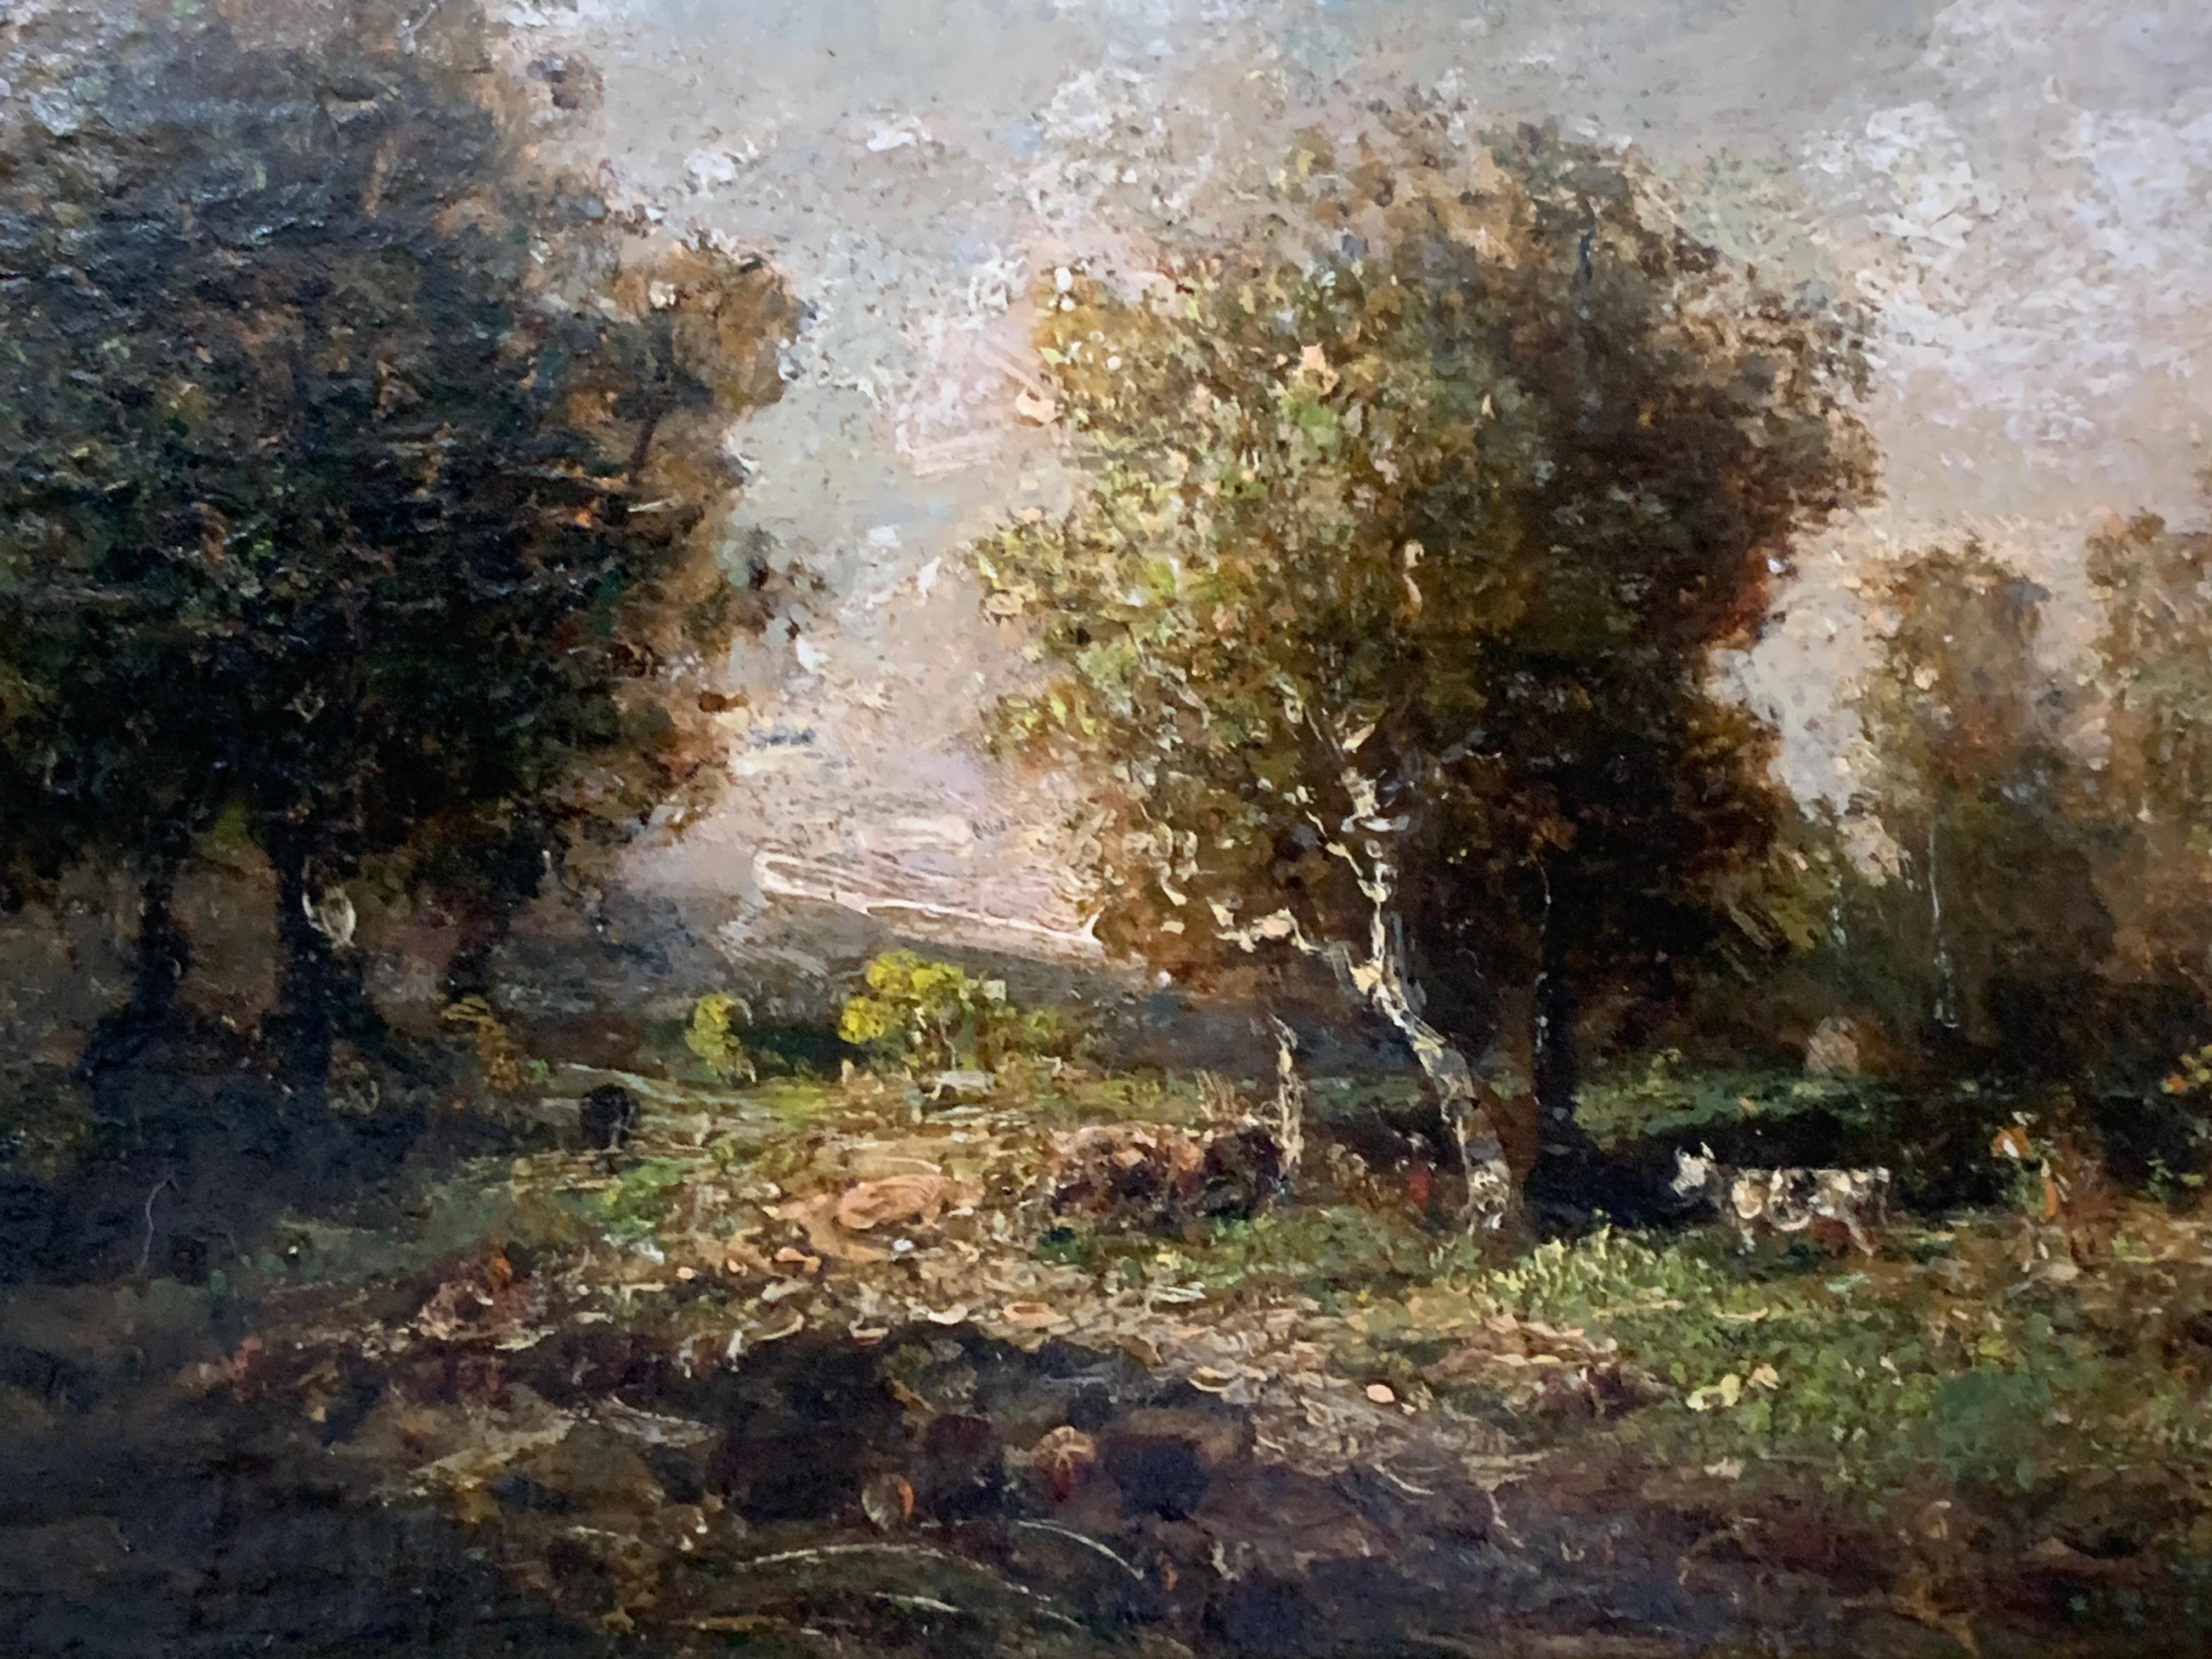 19th century French forest landscape near Barbizon and Fontainebleau - Victorian Painting by Attributed to Narcisse Virgilio Diaz de la Pena